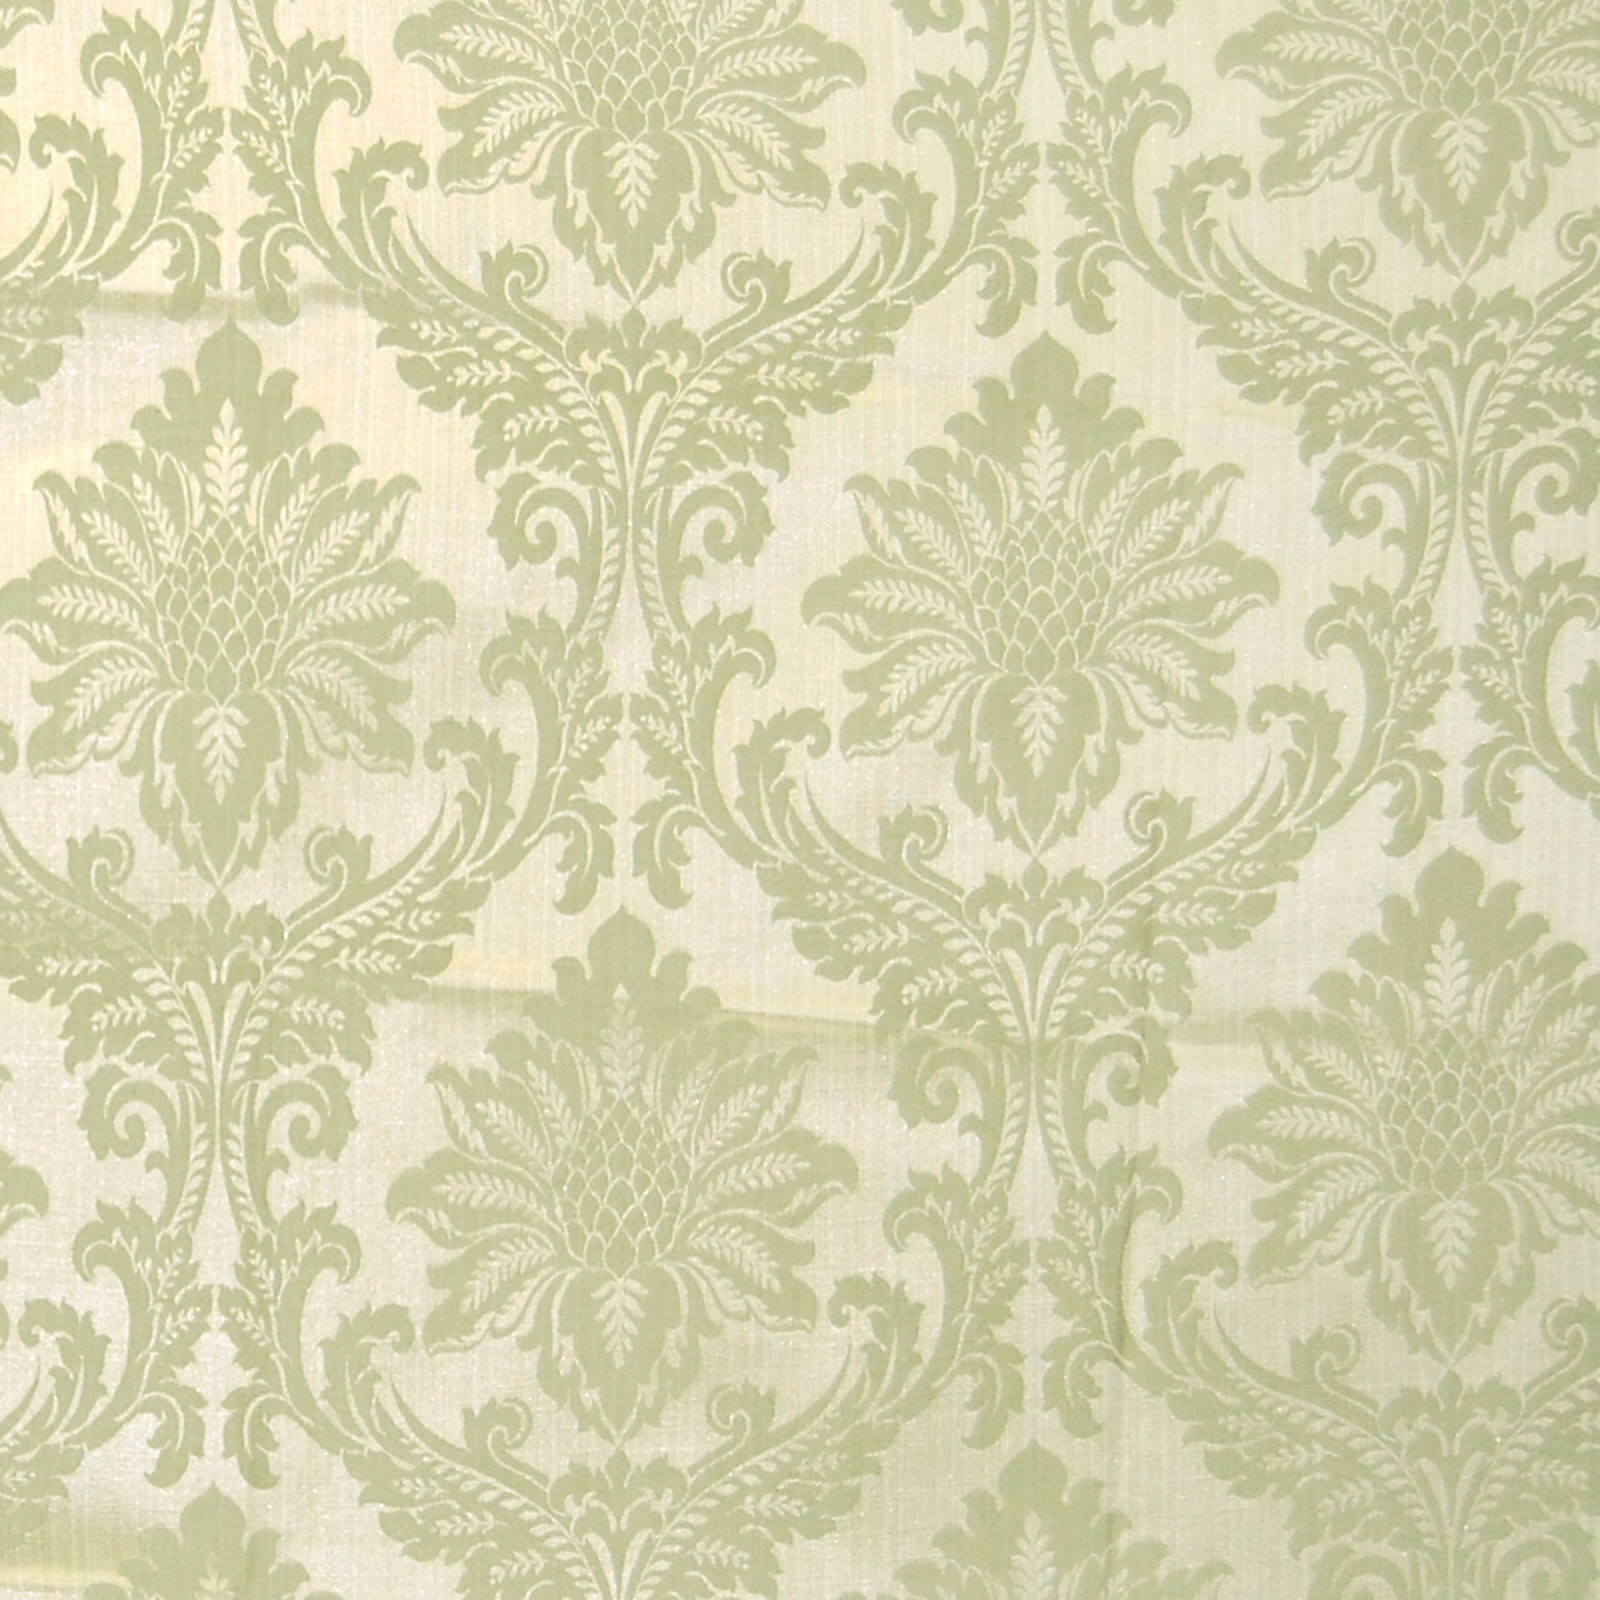 Vintage Retro Celery Green Damask Fabric ~ French pattern ~ upholstery projects 